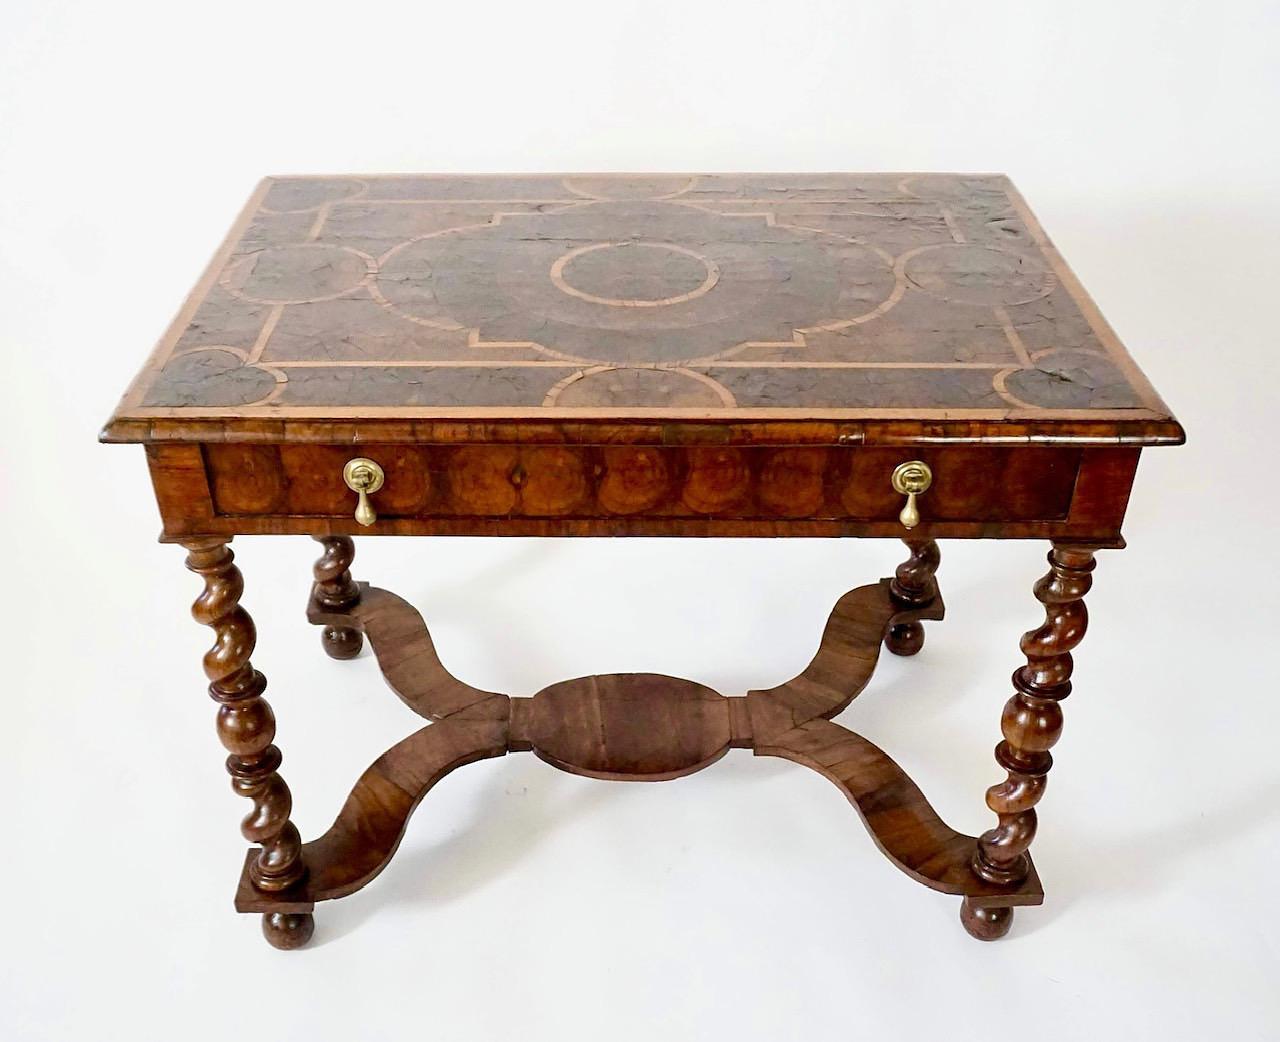 A fine English pre-William-and-Mary, circa 1680 Charles II period side table of rectangular form, the moulded-edge parquetry top inlaid with olivewood 'oystering' within geometric strapwork in holly atop oyster-frieze single drawer with original